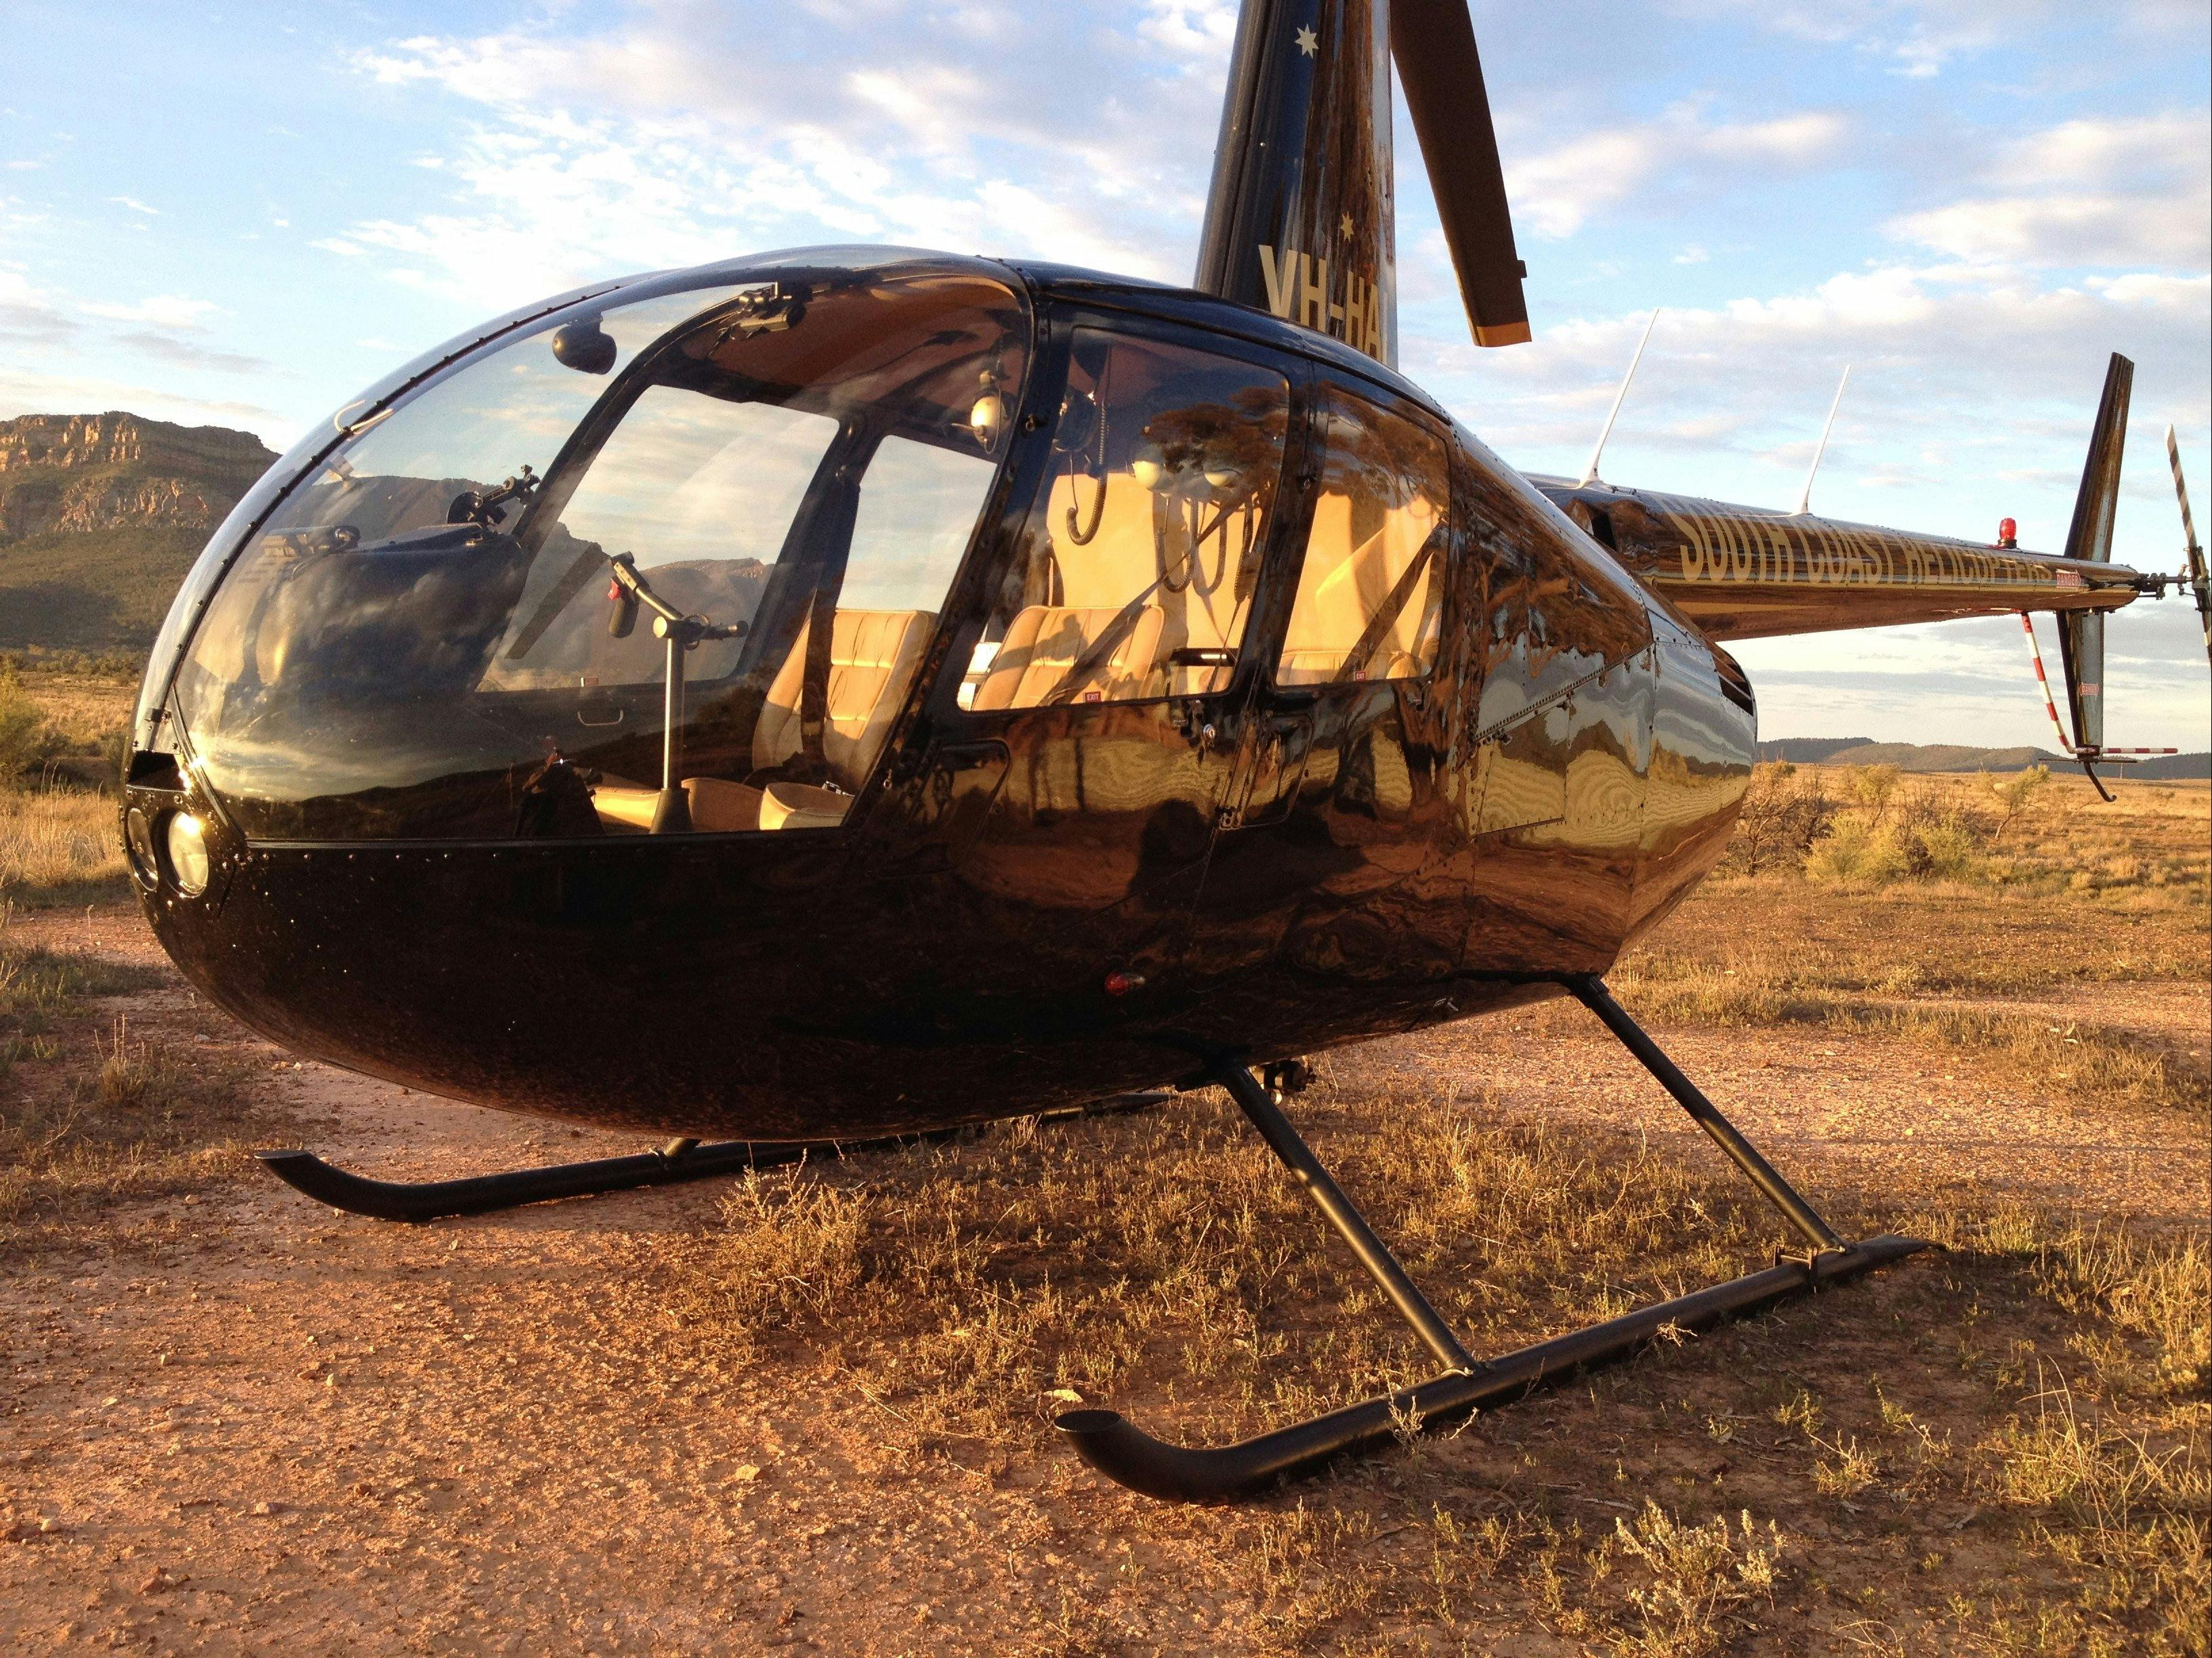 Adelaide Helicopters